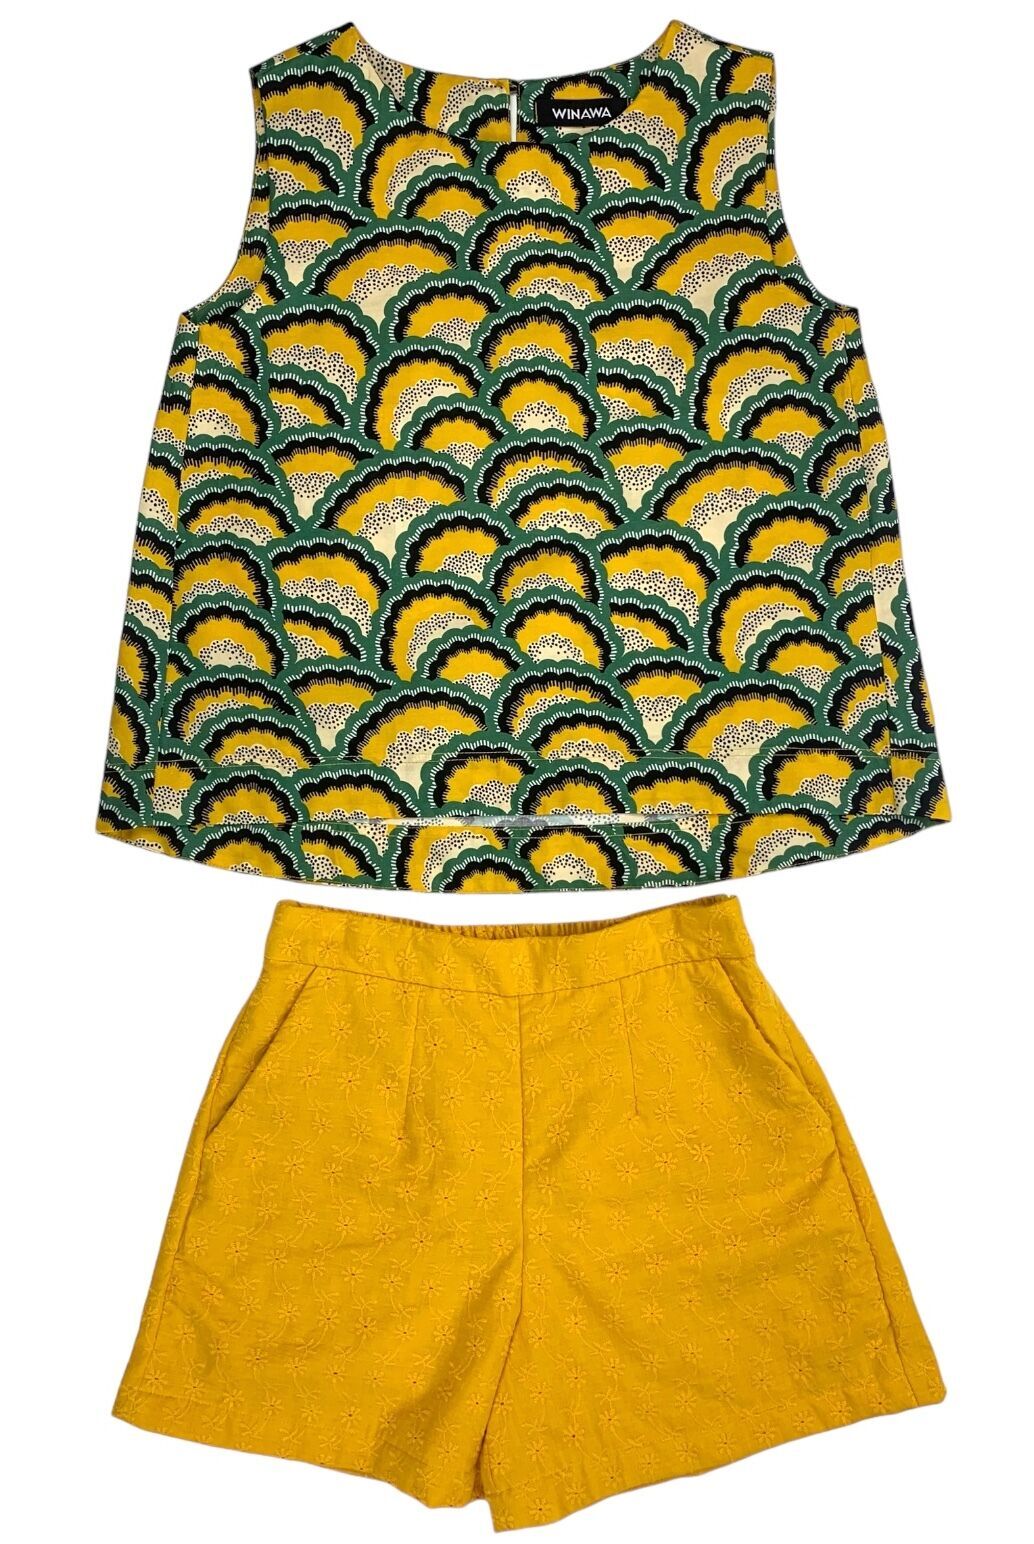 AFRICAN SLEEVELESS TOPS AND SHORTS SET